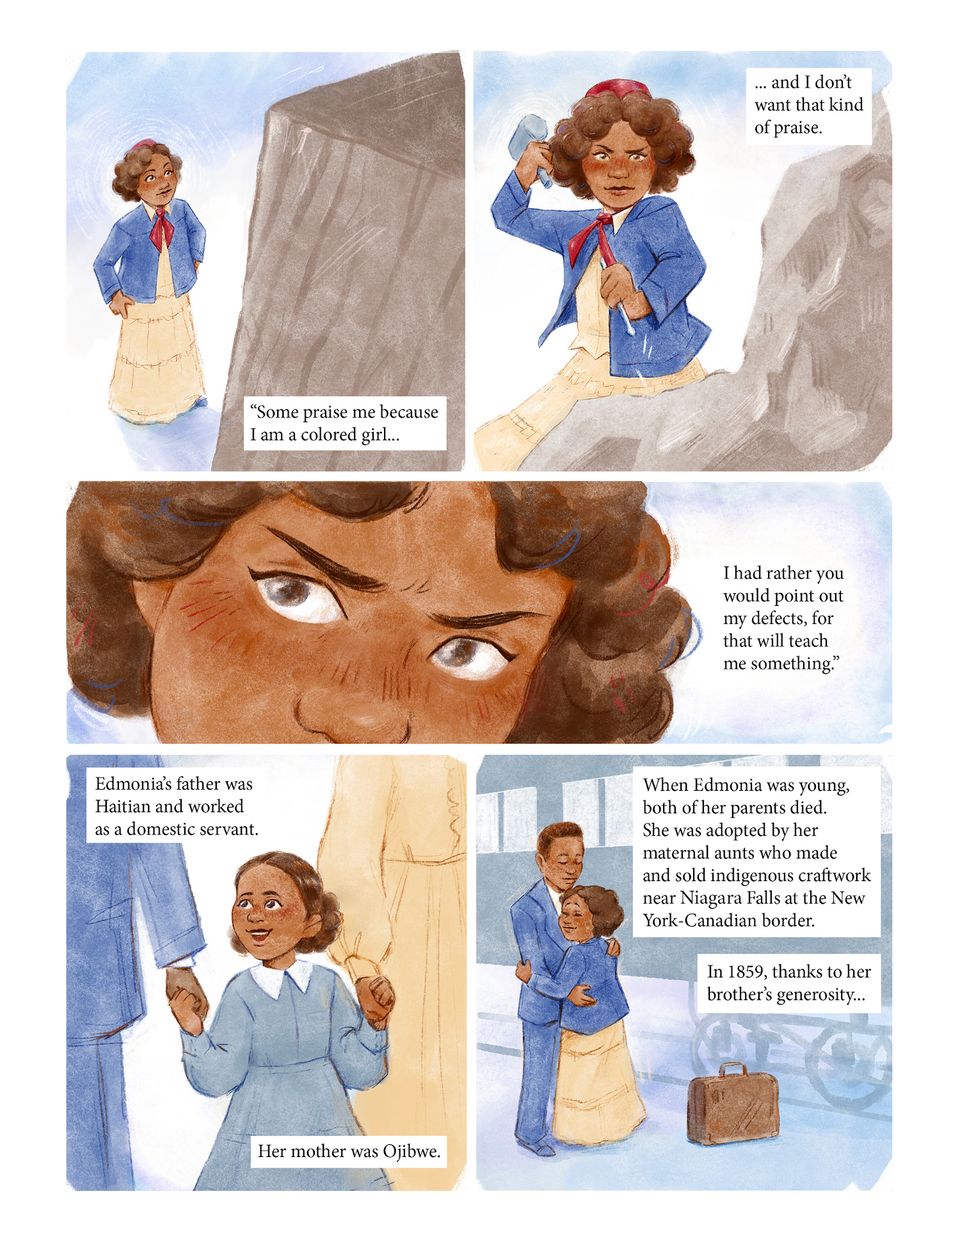 Breaking the Marble Ceiling: A Comic About Edmonia Lewis, page one